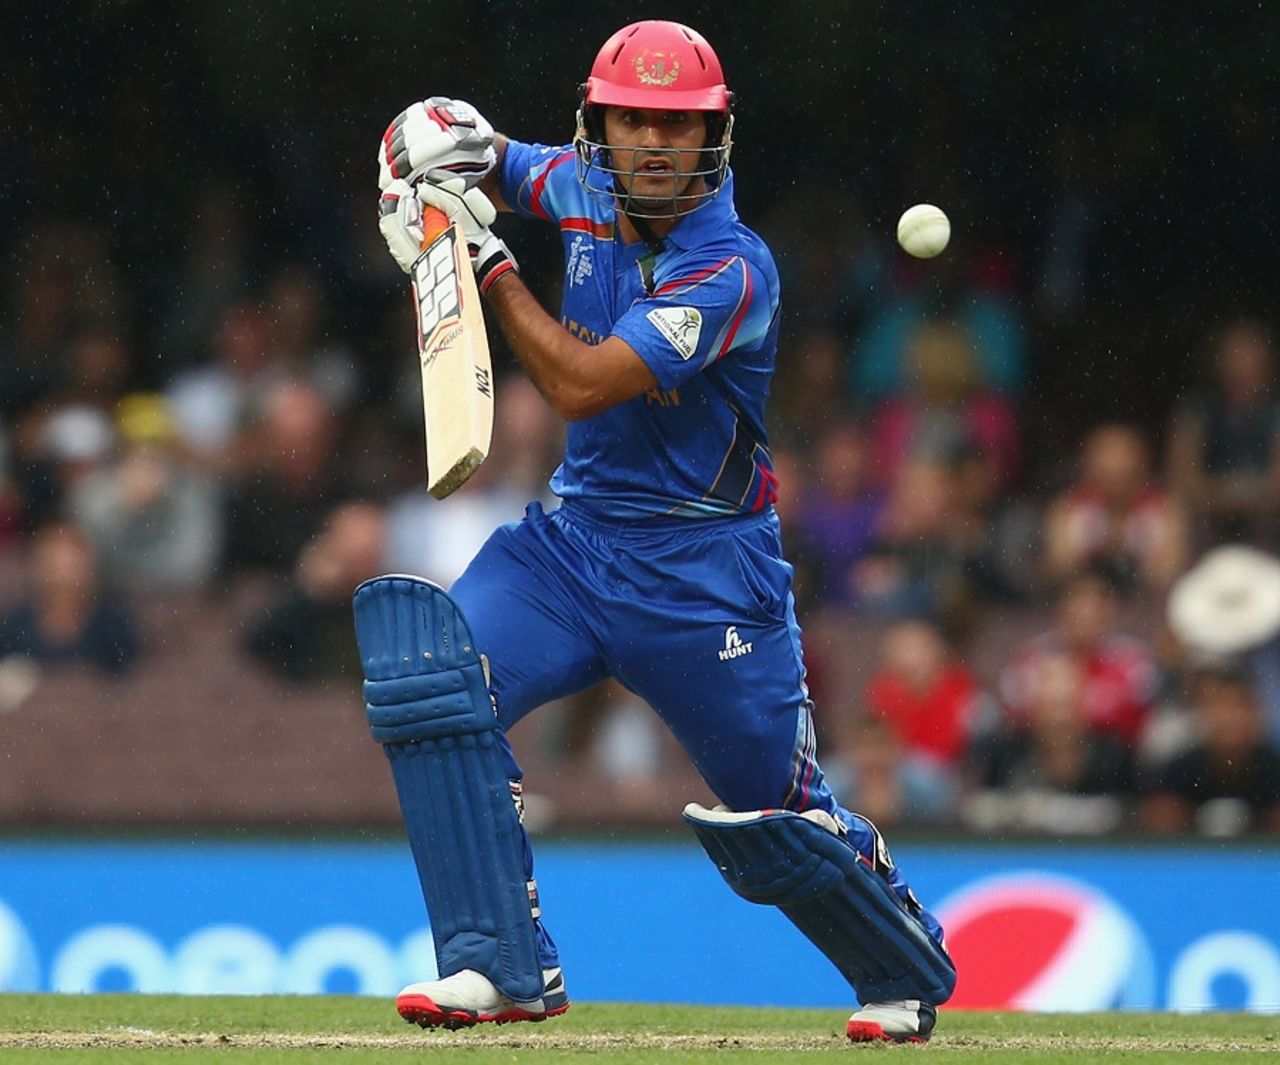 Najibullah Zadran knocks the ball to the off side, Afghanistan v England, World Cup 2015, Group A, Sydney, March 13, 2015